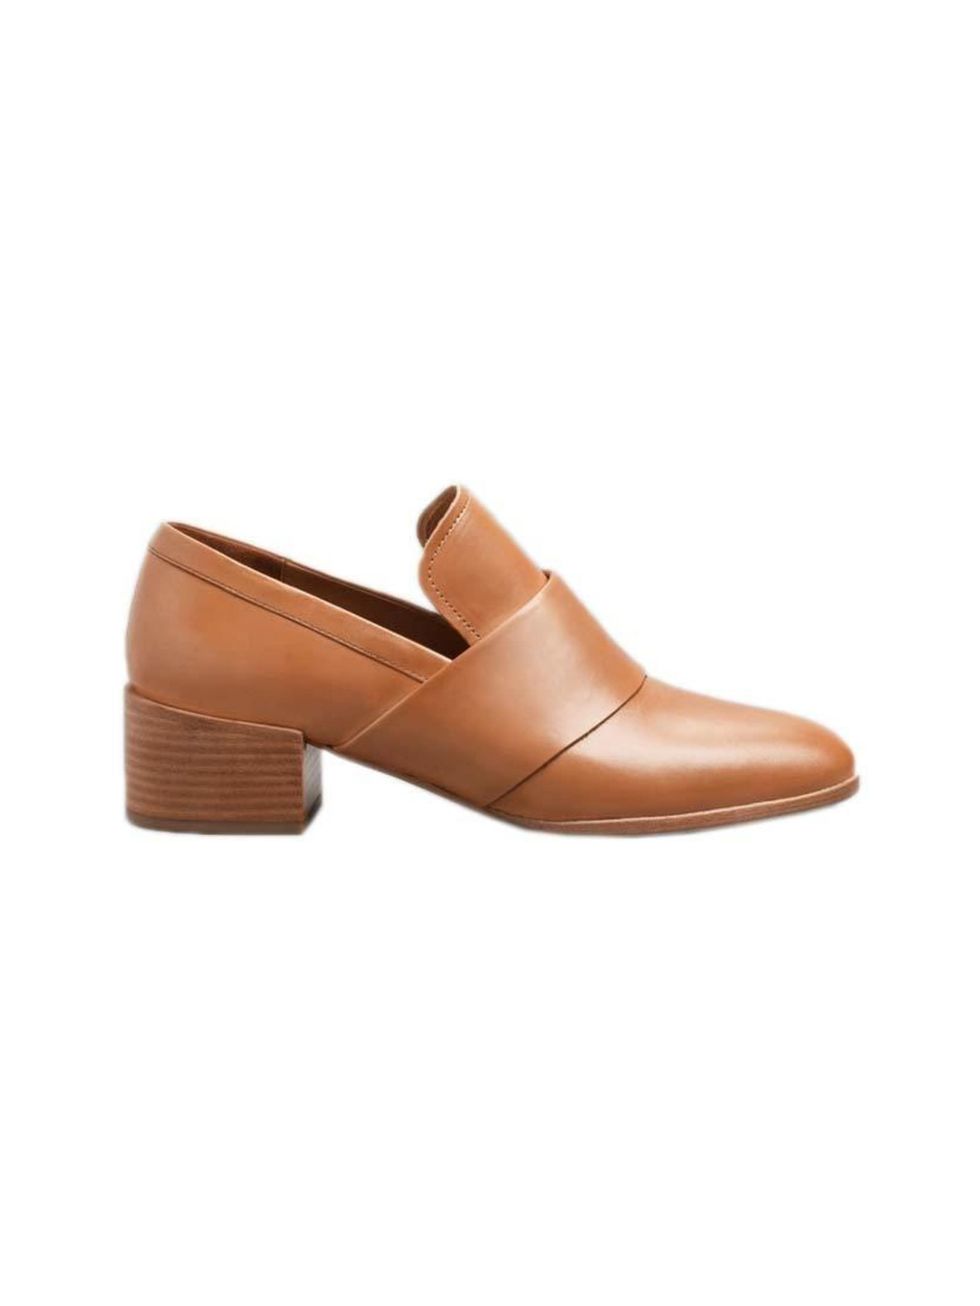 <p>Fashion Assistant Charlie Gowans-Eglinton will pair these androgynous slip-ons with rolled-up jeans.</p>

<p><a href="http://www.stories.com/gb/New_in/All_new_in/Low-Heel_Leather_Loafers/591727-8382681.1" target="_blank">& Other Stories</a> shoes, £95<